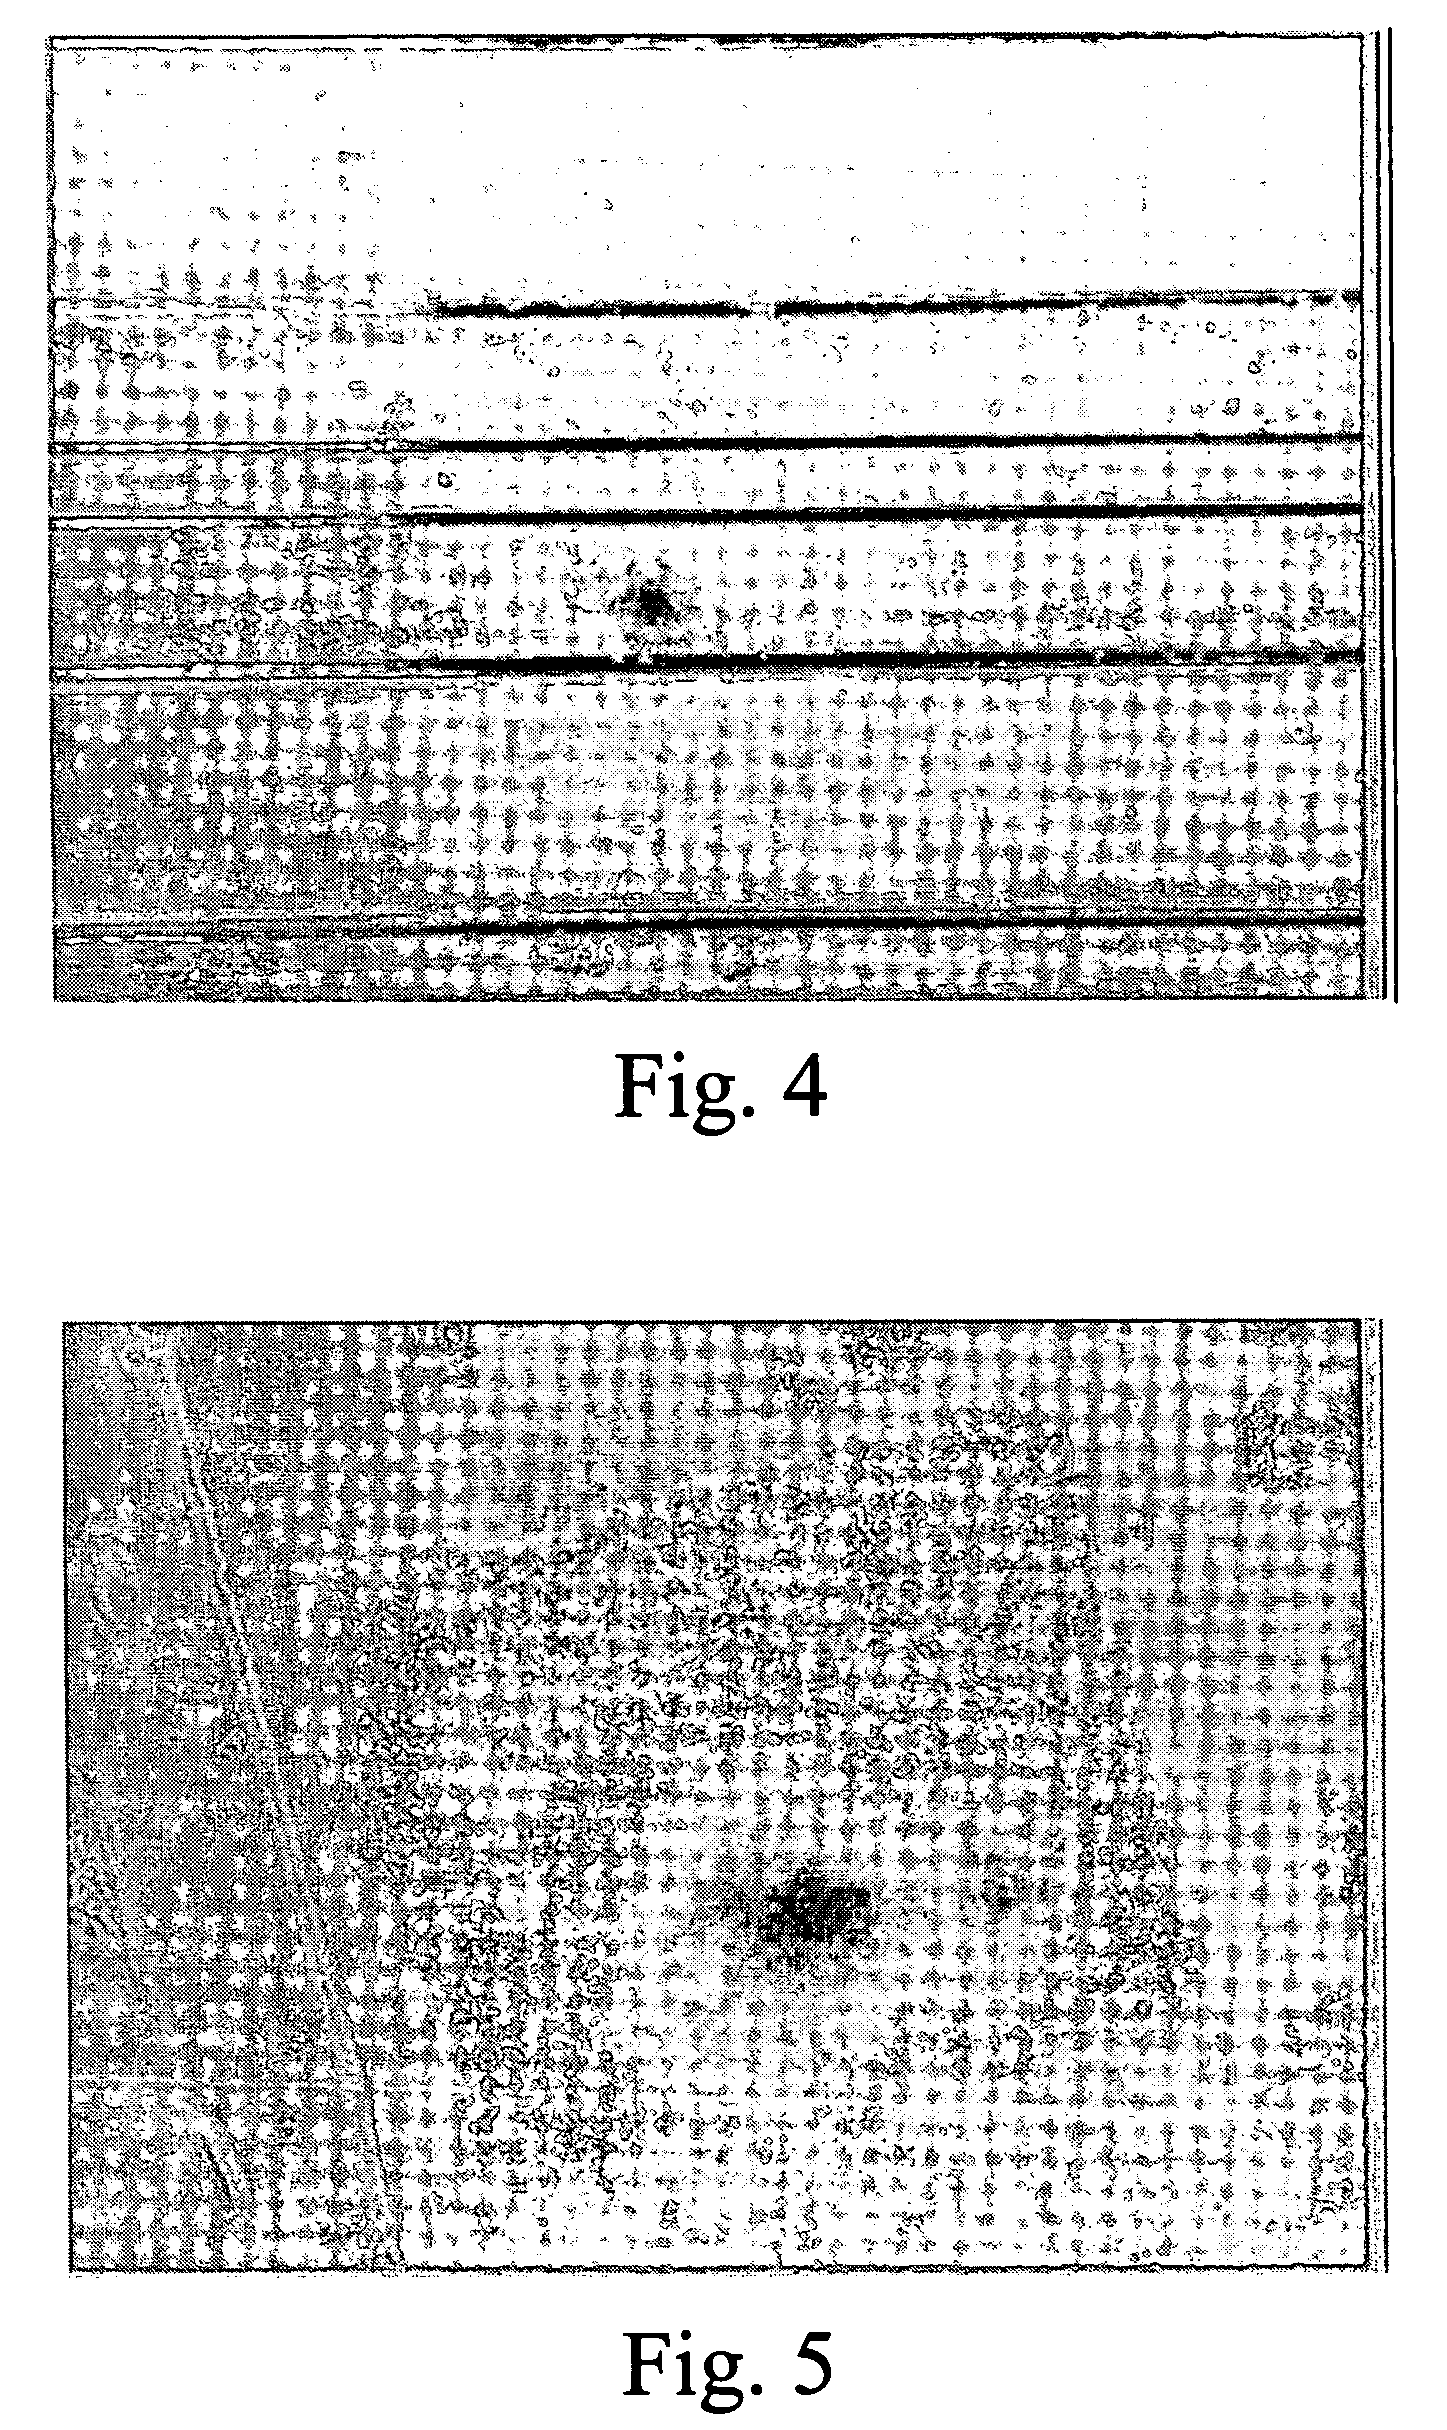 Hydrogel composition for cell culture apparatus